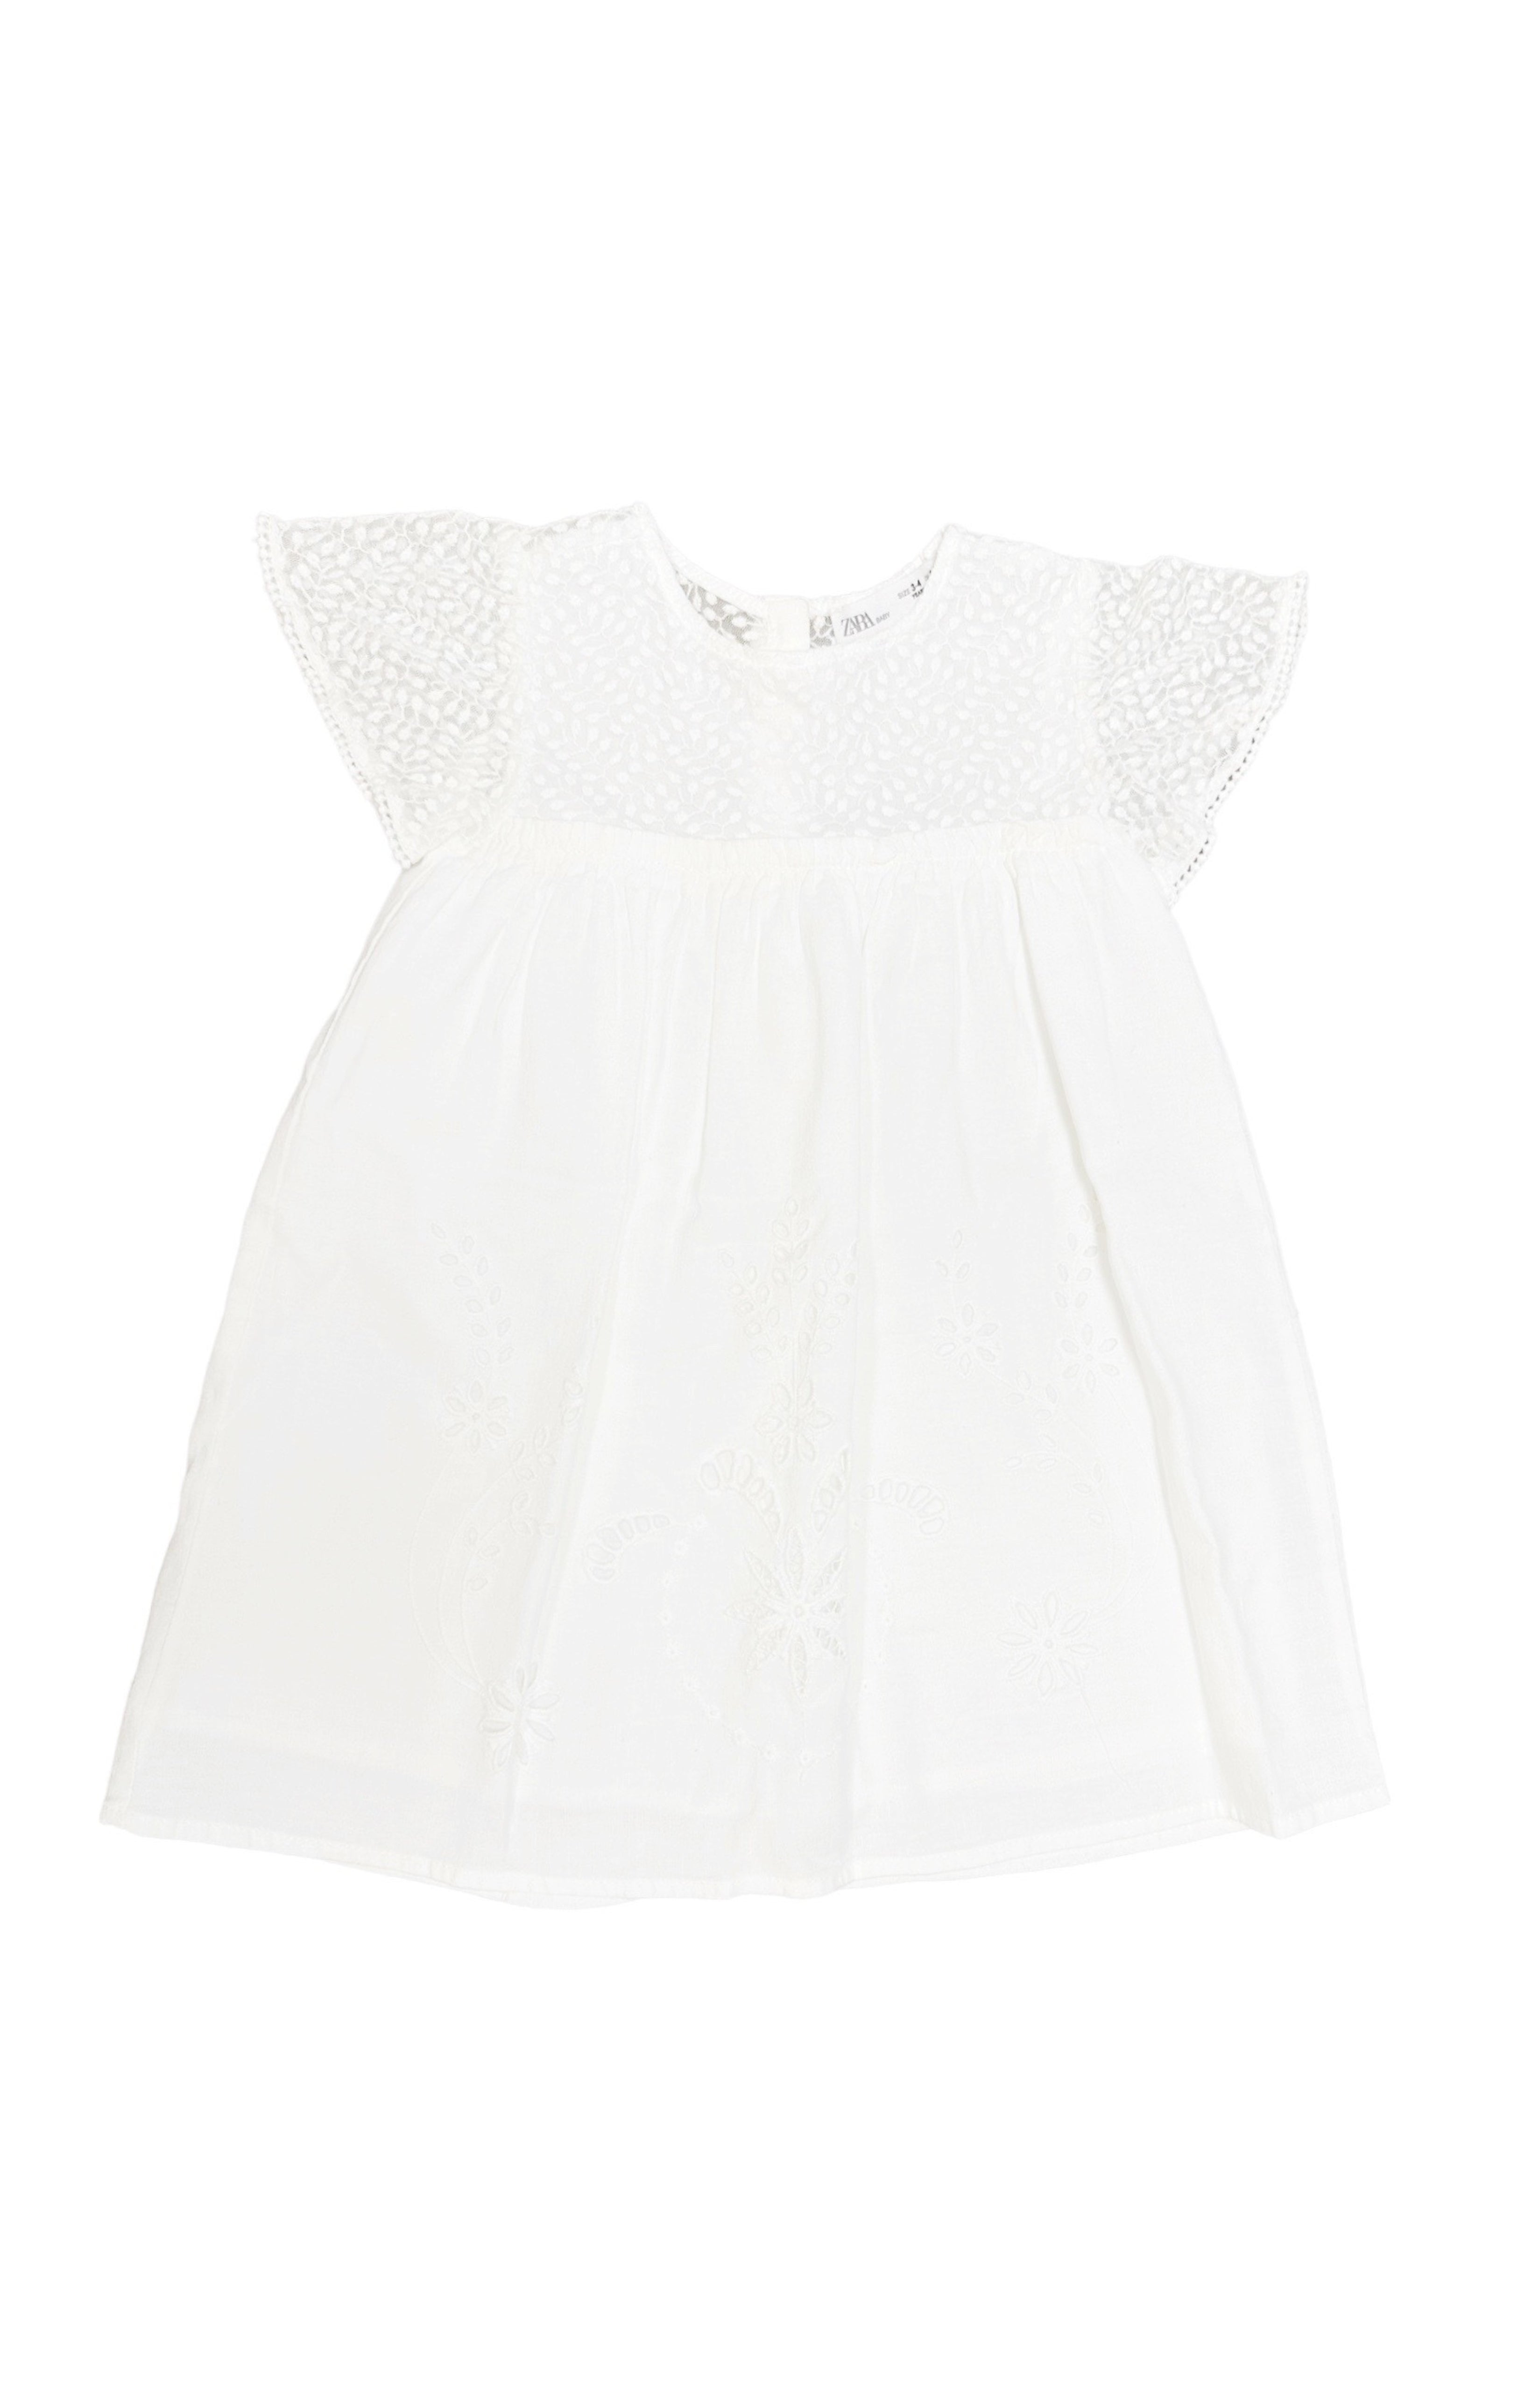 ZARA BABY (NEW) with tags Dress Size: 3-4 Years